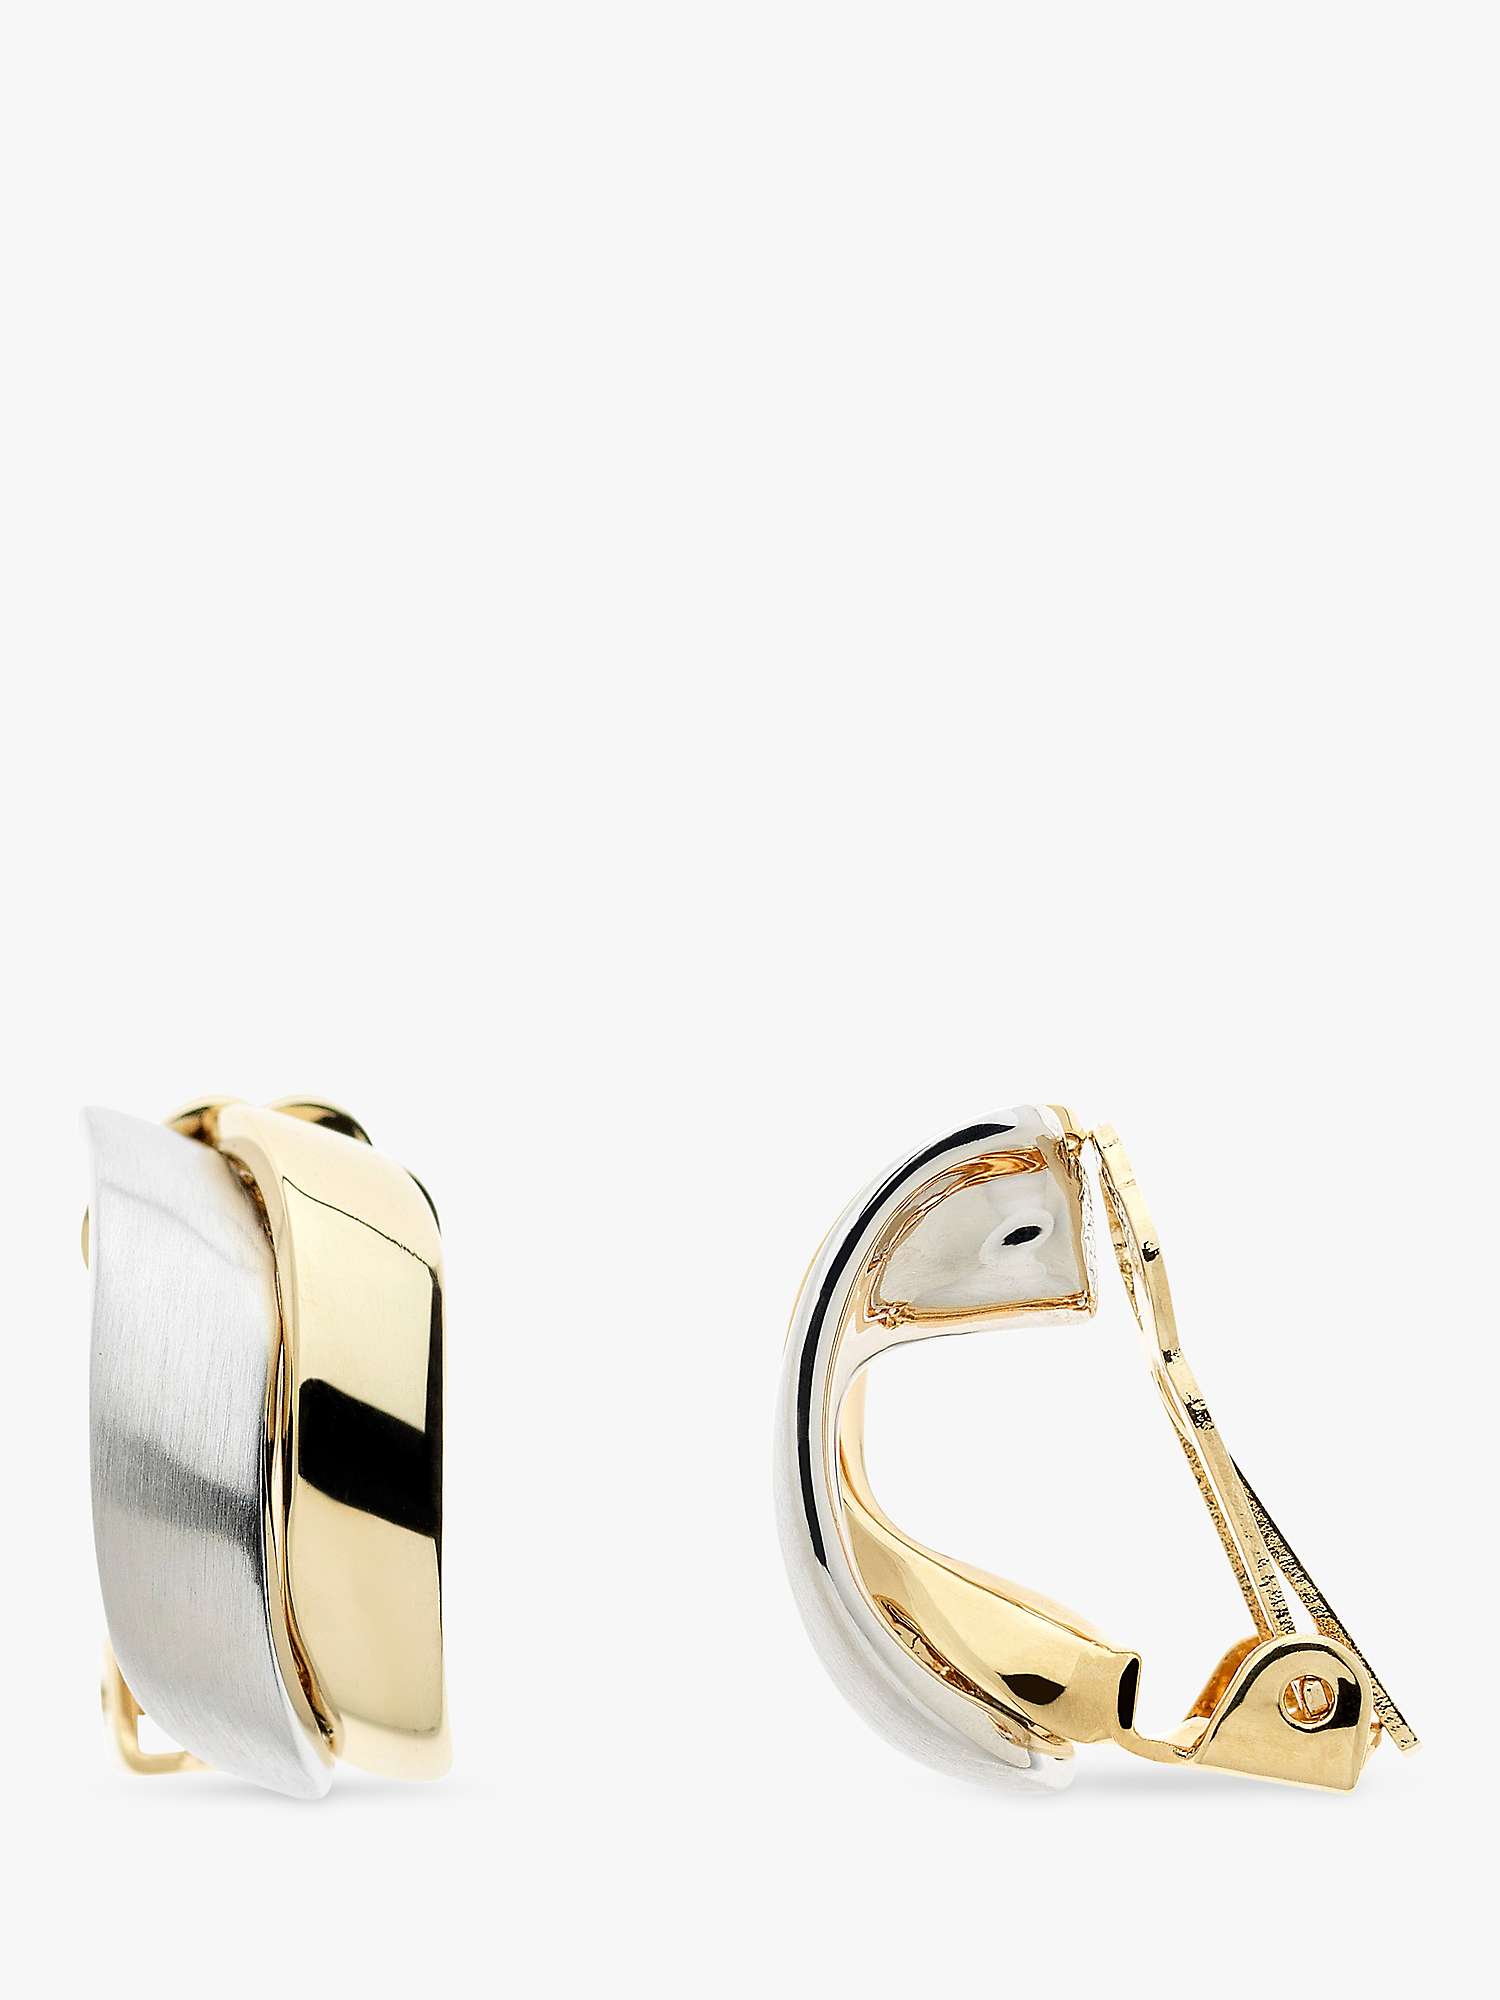 Buy Emma Holland Curved Wave Clip-On Earrings, Gold/Silver Online at johnlewis.com